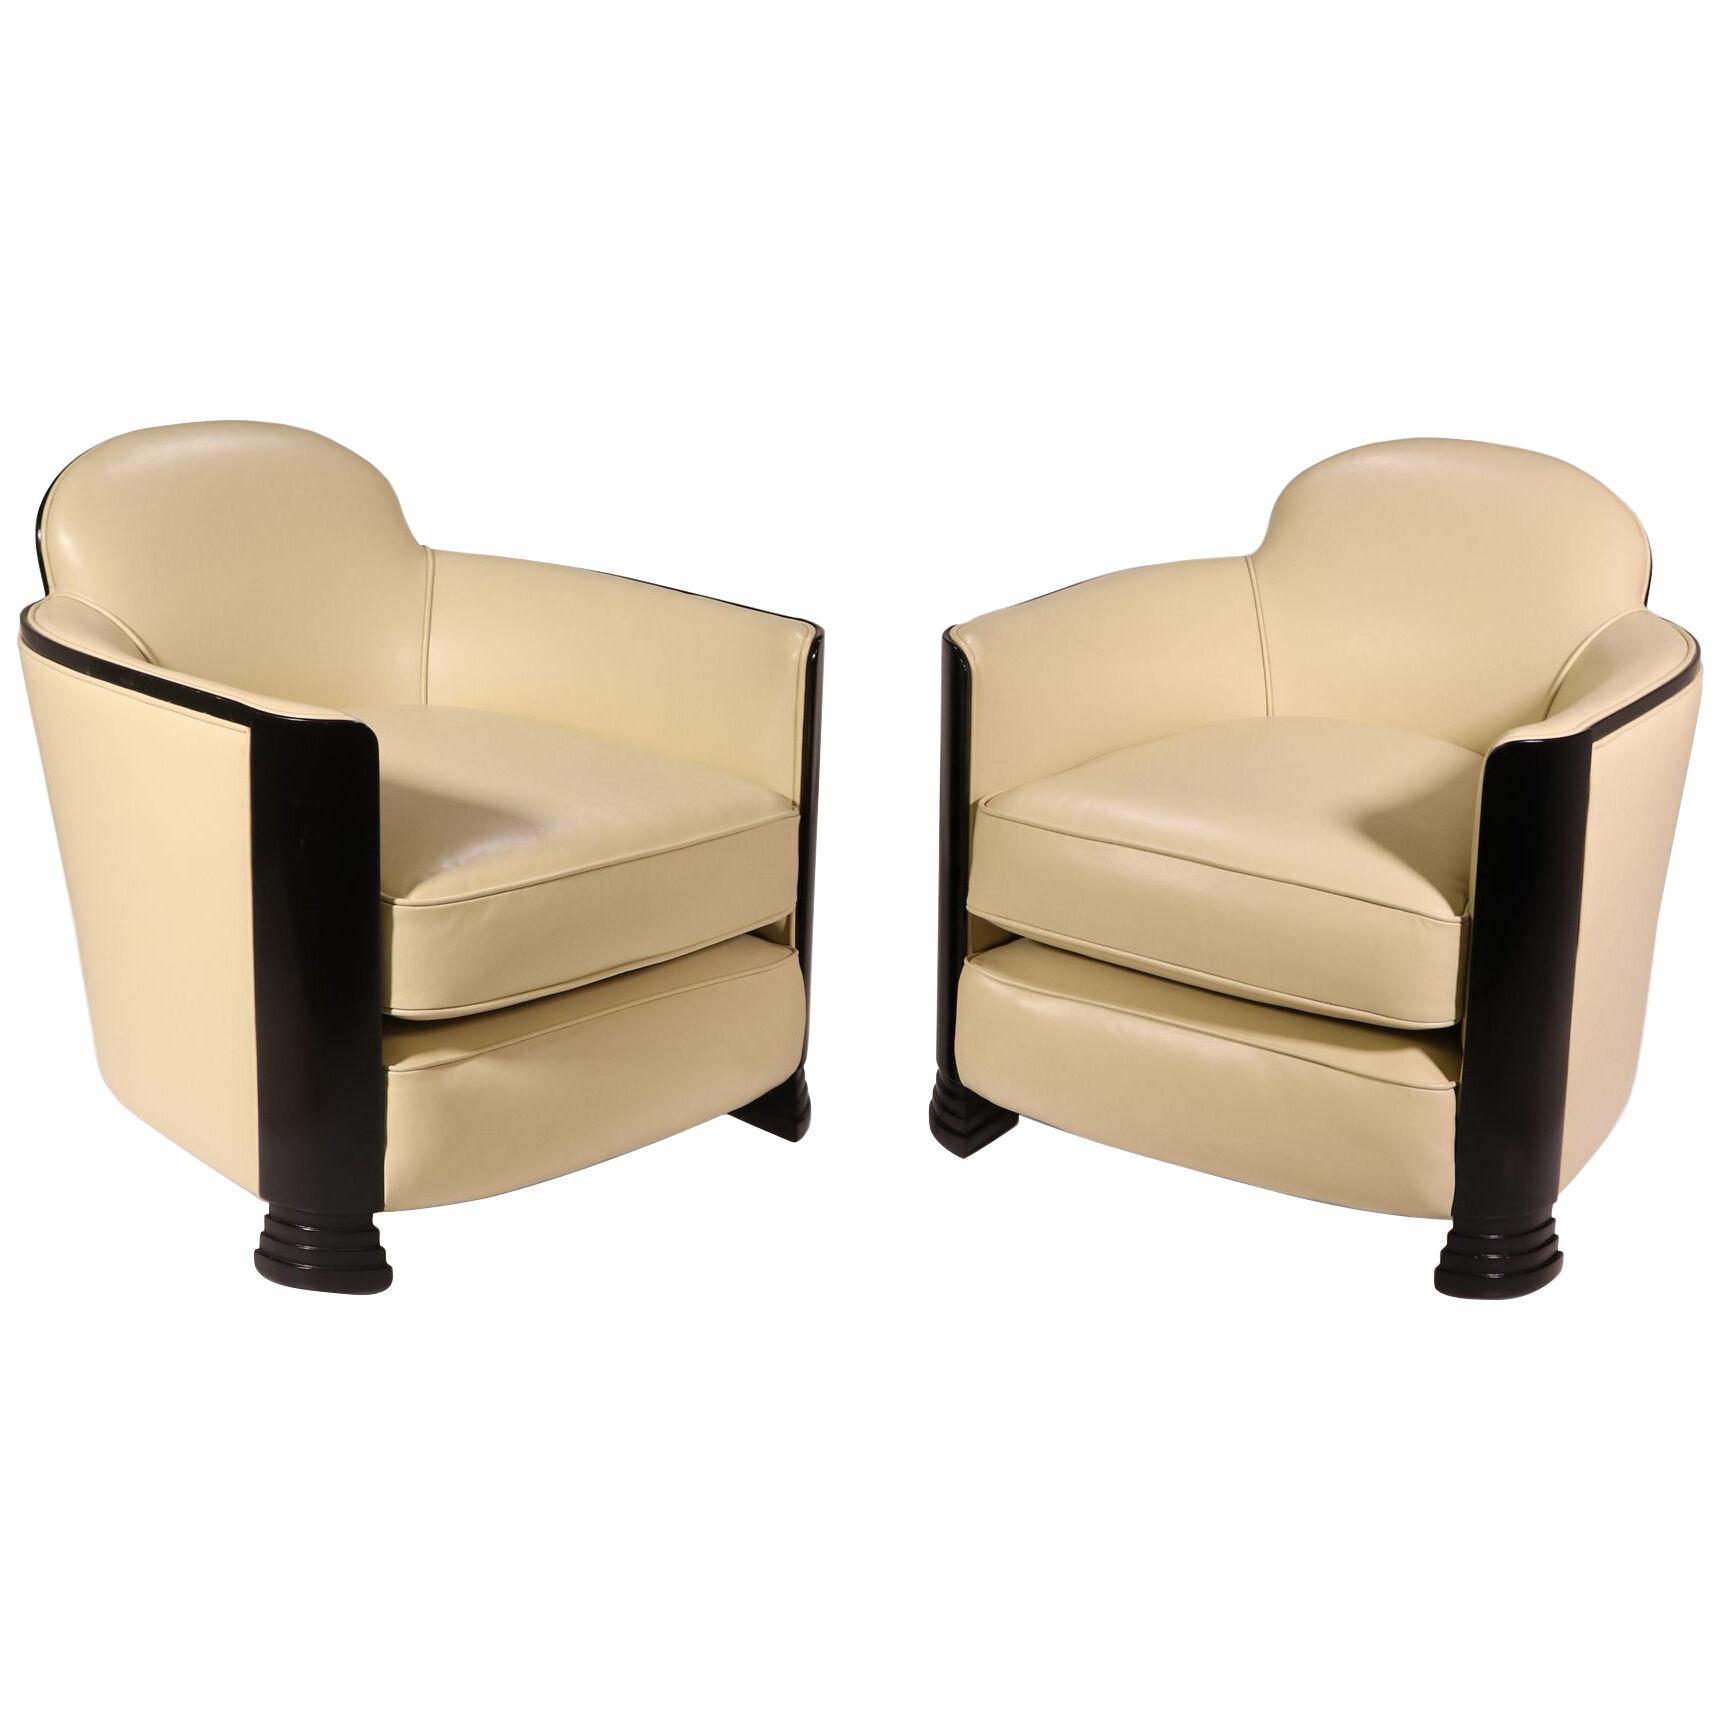 A Pair of Art Deco Arm Chairs c1930